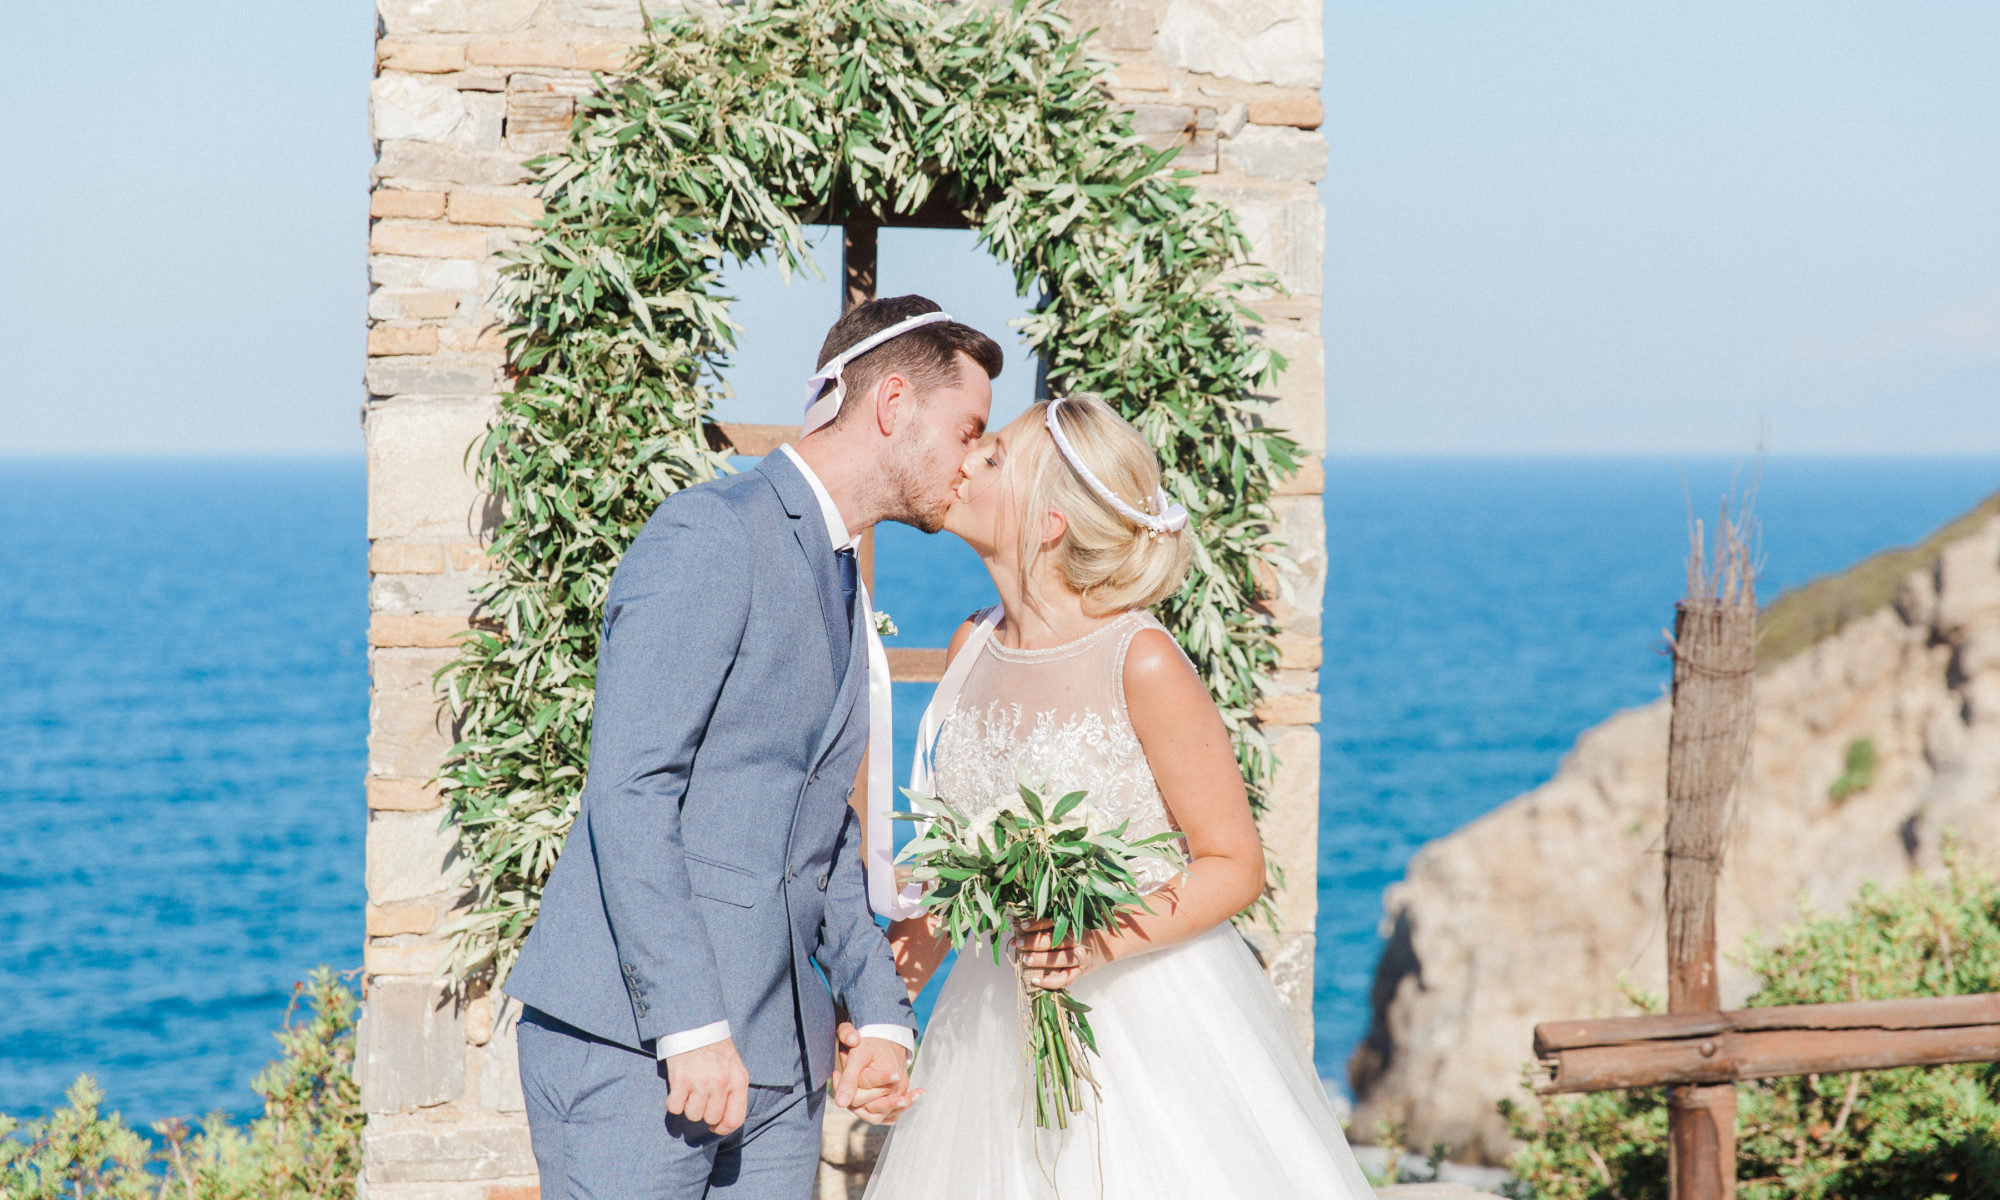 The couples first kiss at the end of their celebrant led wedding ceremony at Villa Delenia in Evia Greece. The couple are wearing Greek wedding crowns.